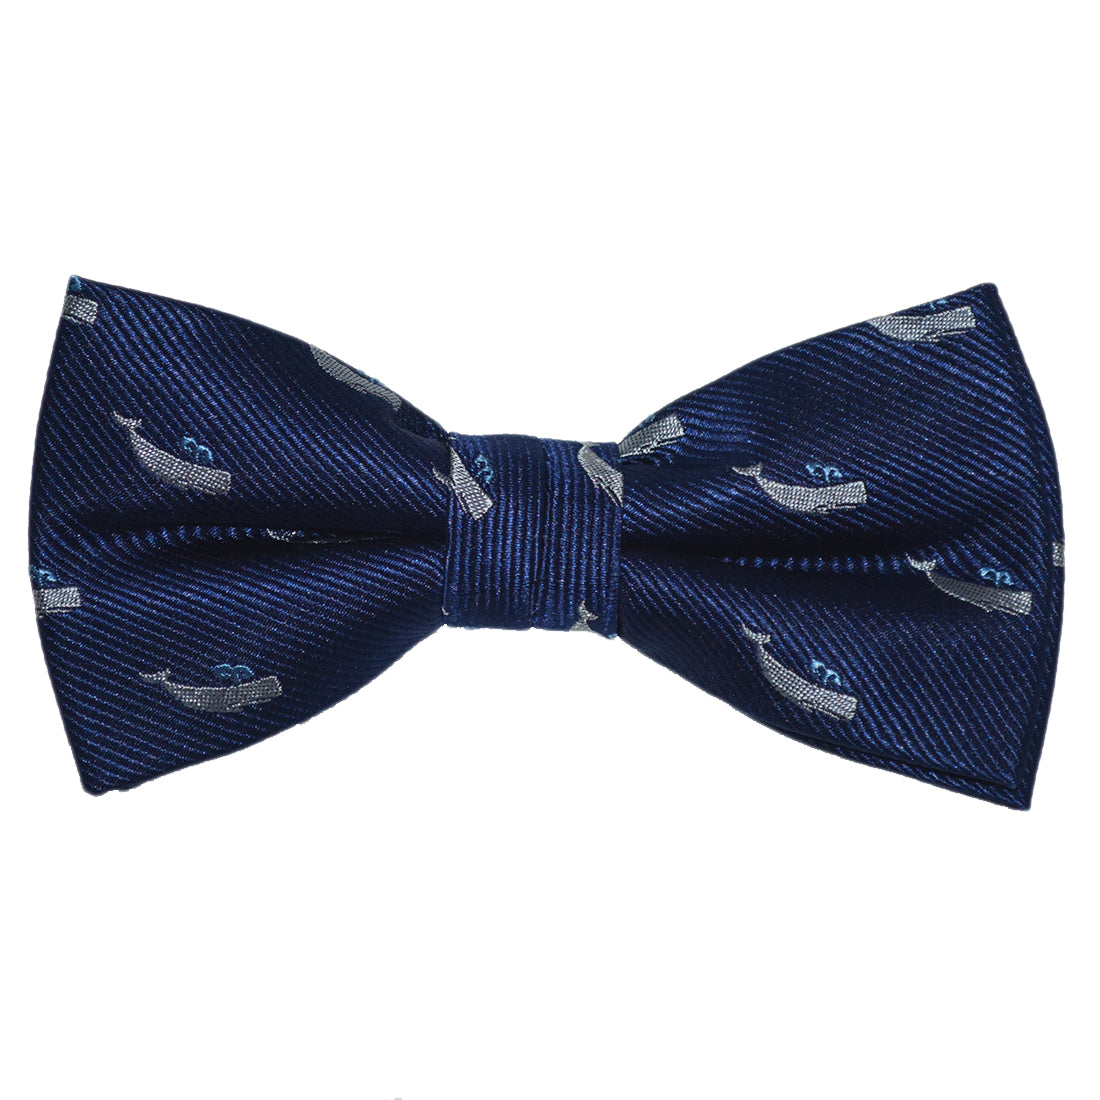 Sperm Whale Bow Tie - Navy, Woven Silk, Pre-Tied for Kids - SummerTies